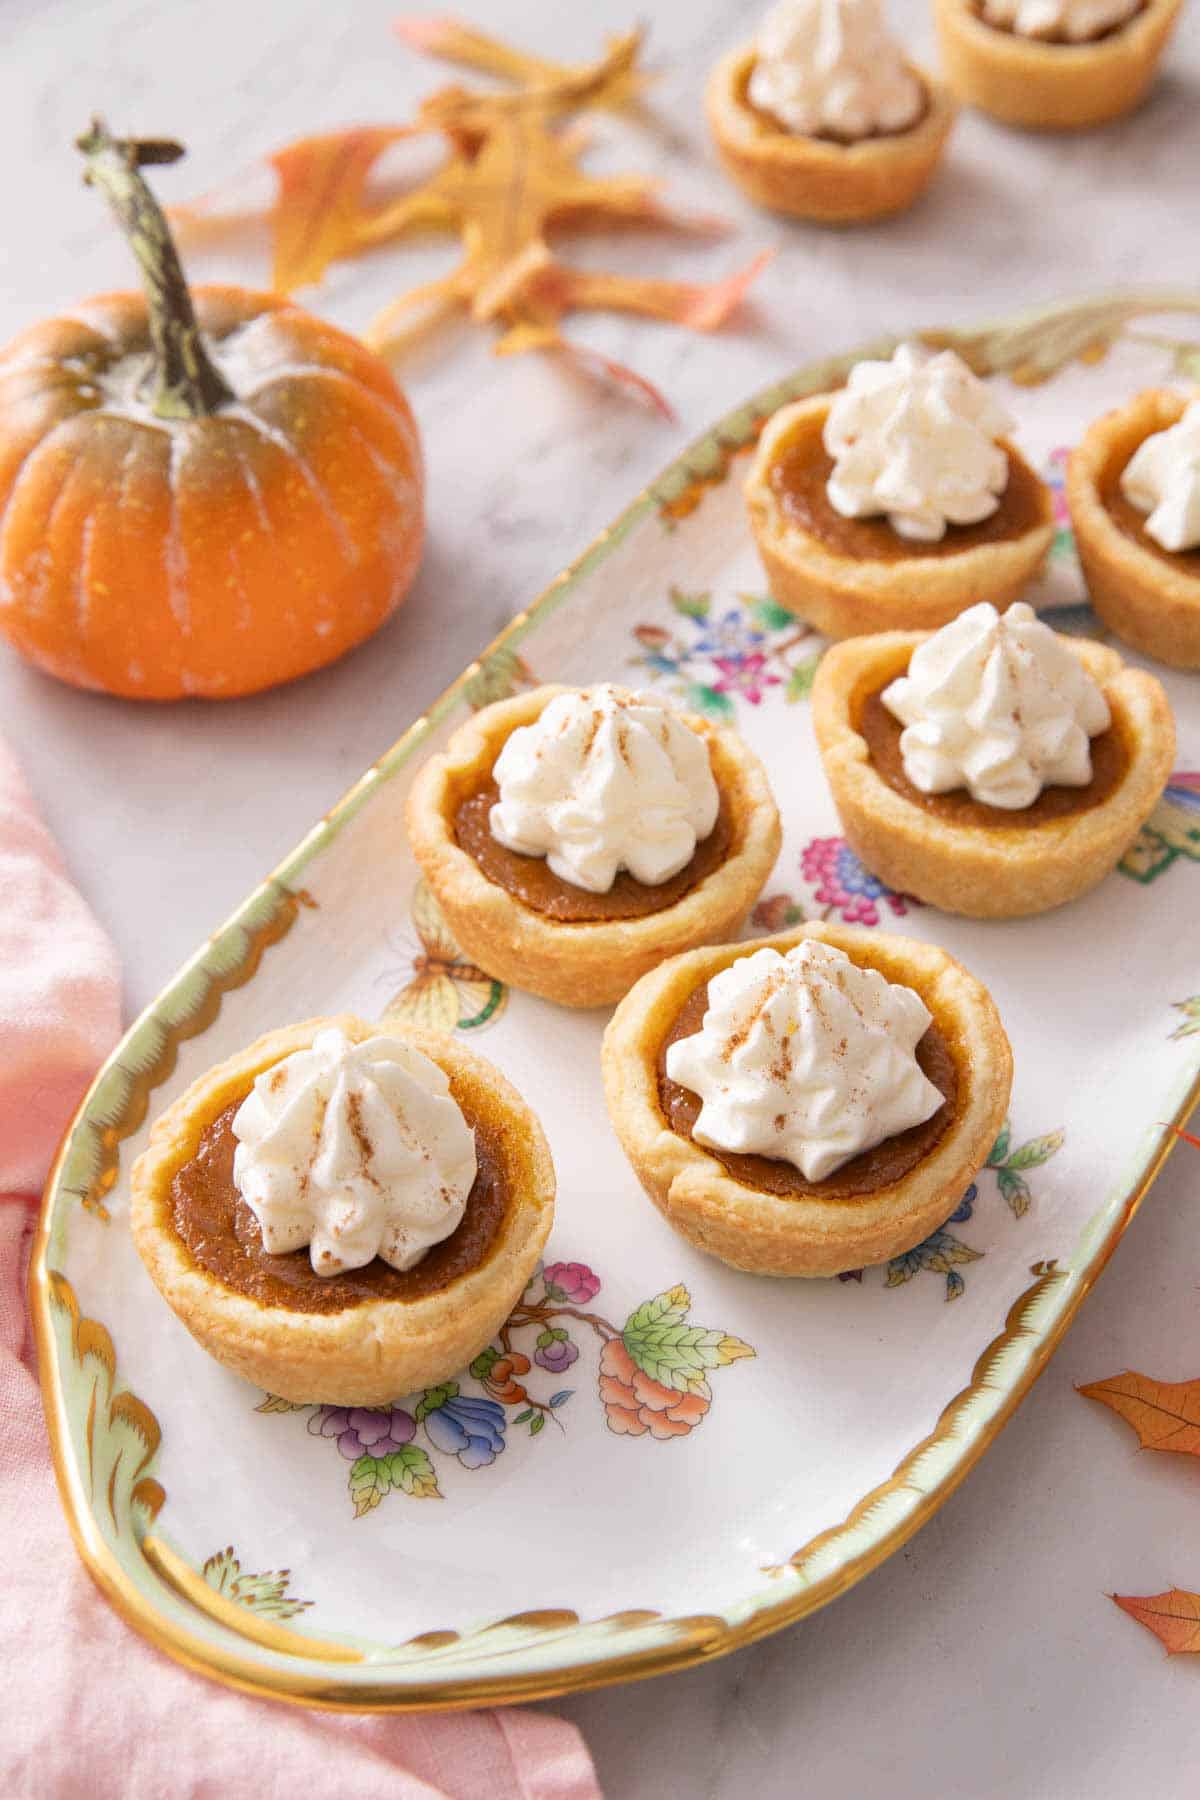 A platter of mini pumpkin pies with whipped cream on top. A mini pumpkin and some leaves in the background.